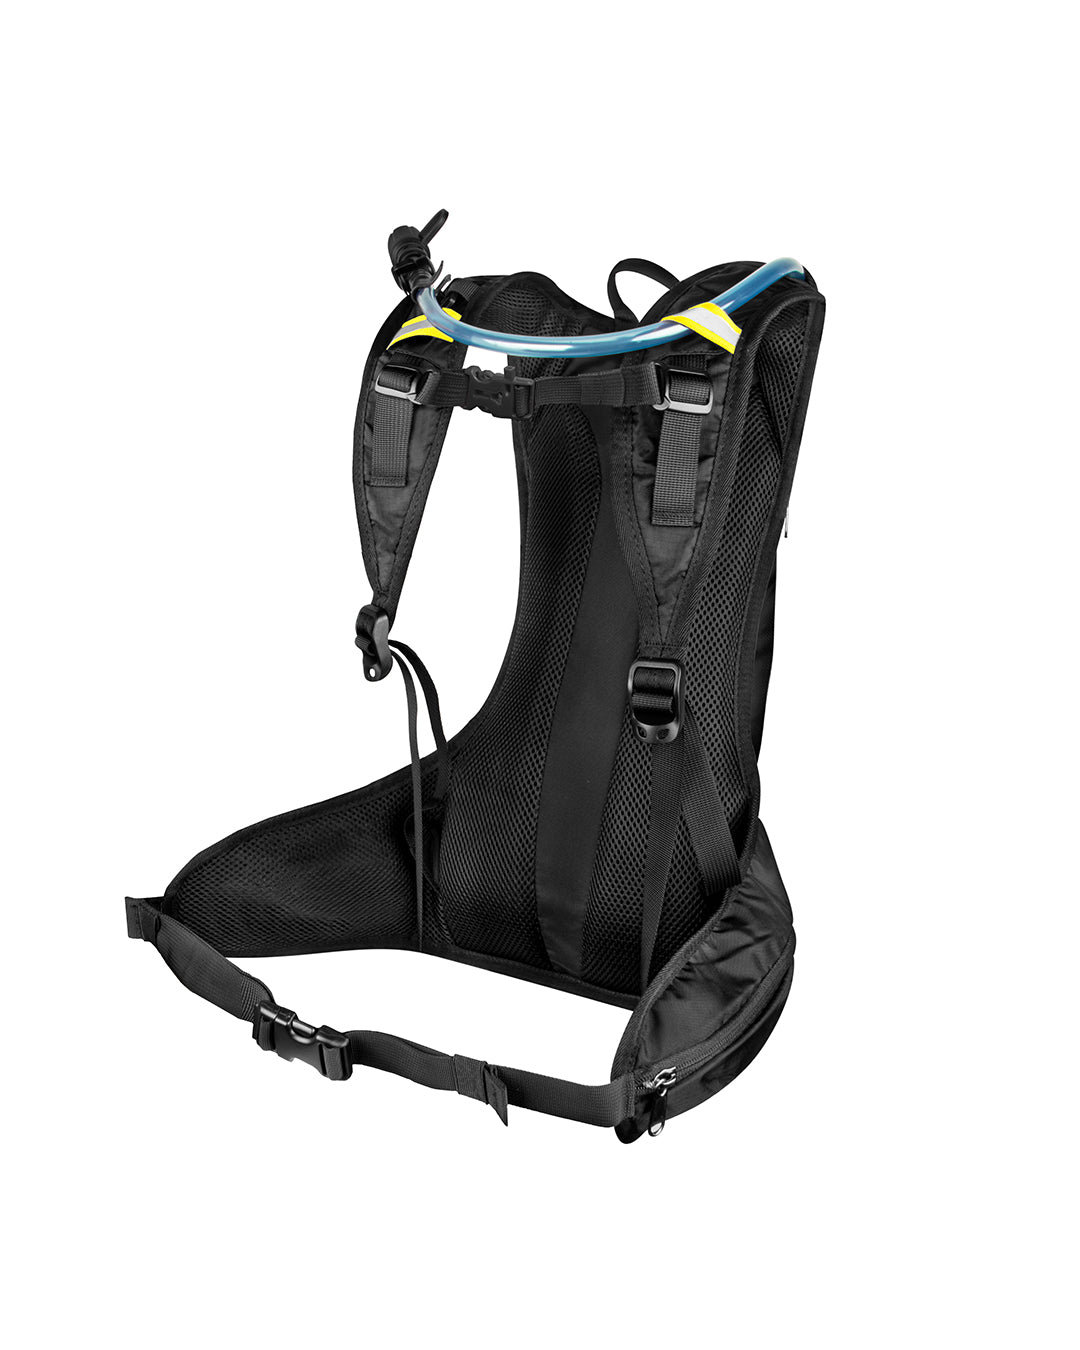 OASIS HYDRATION BACKPACK